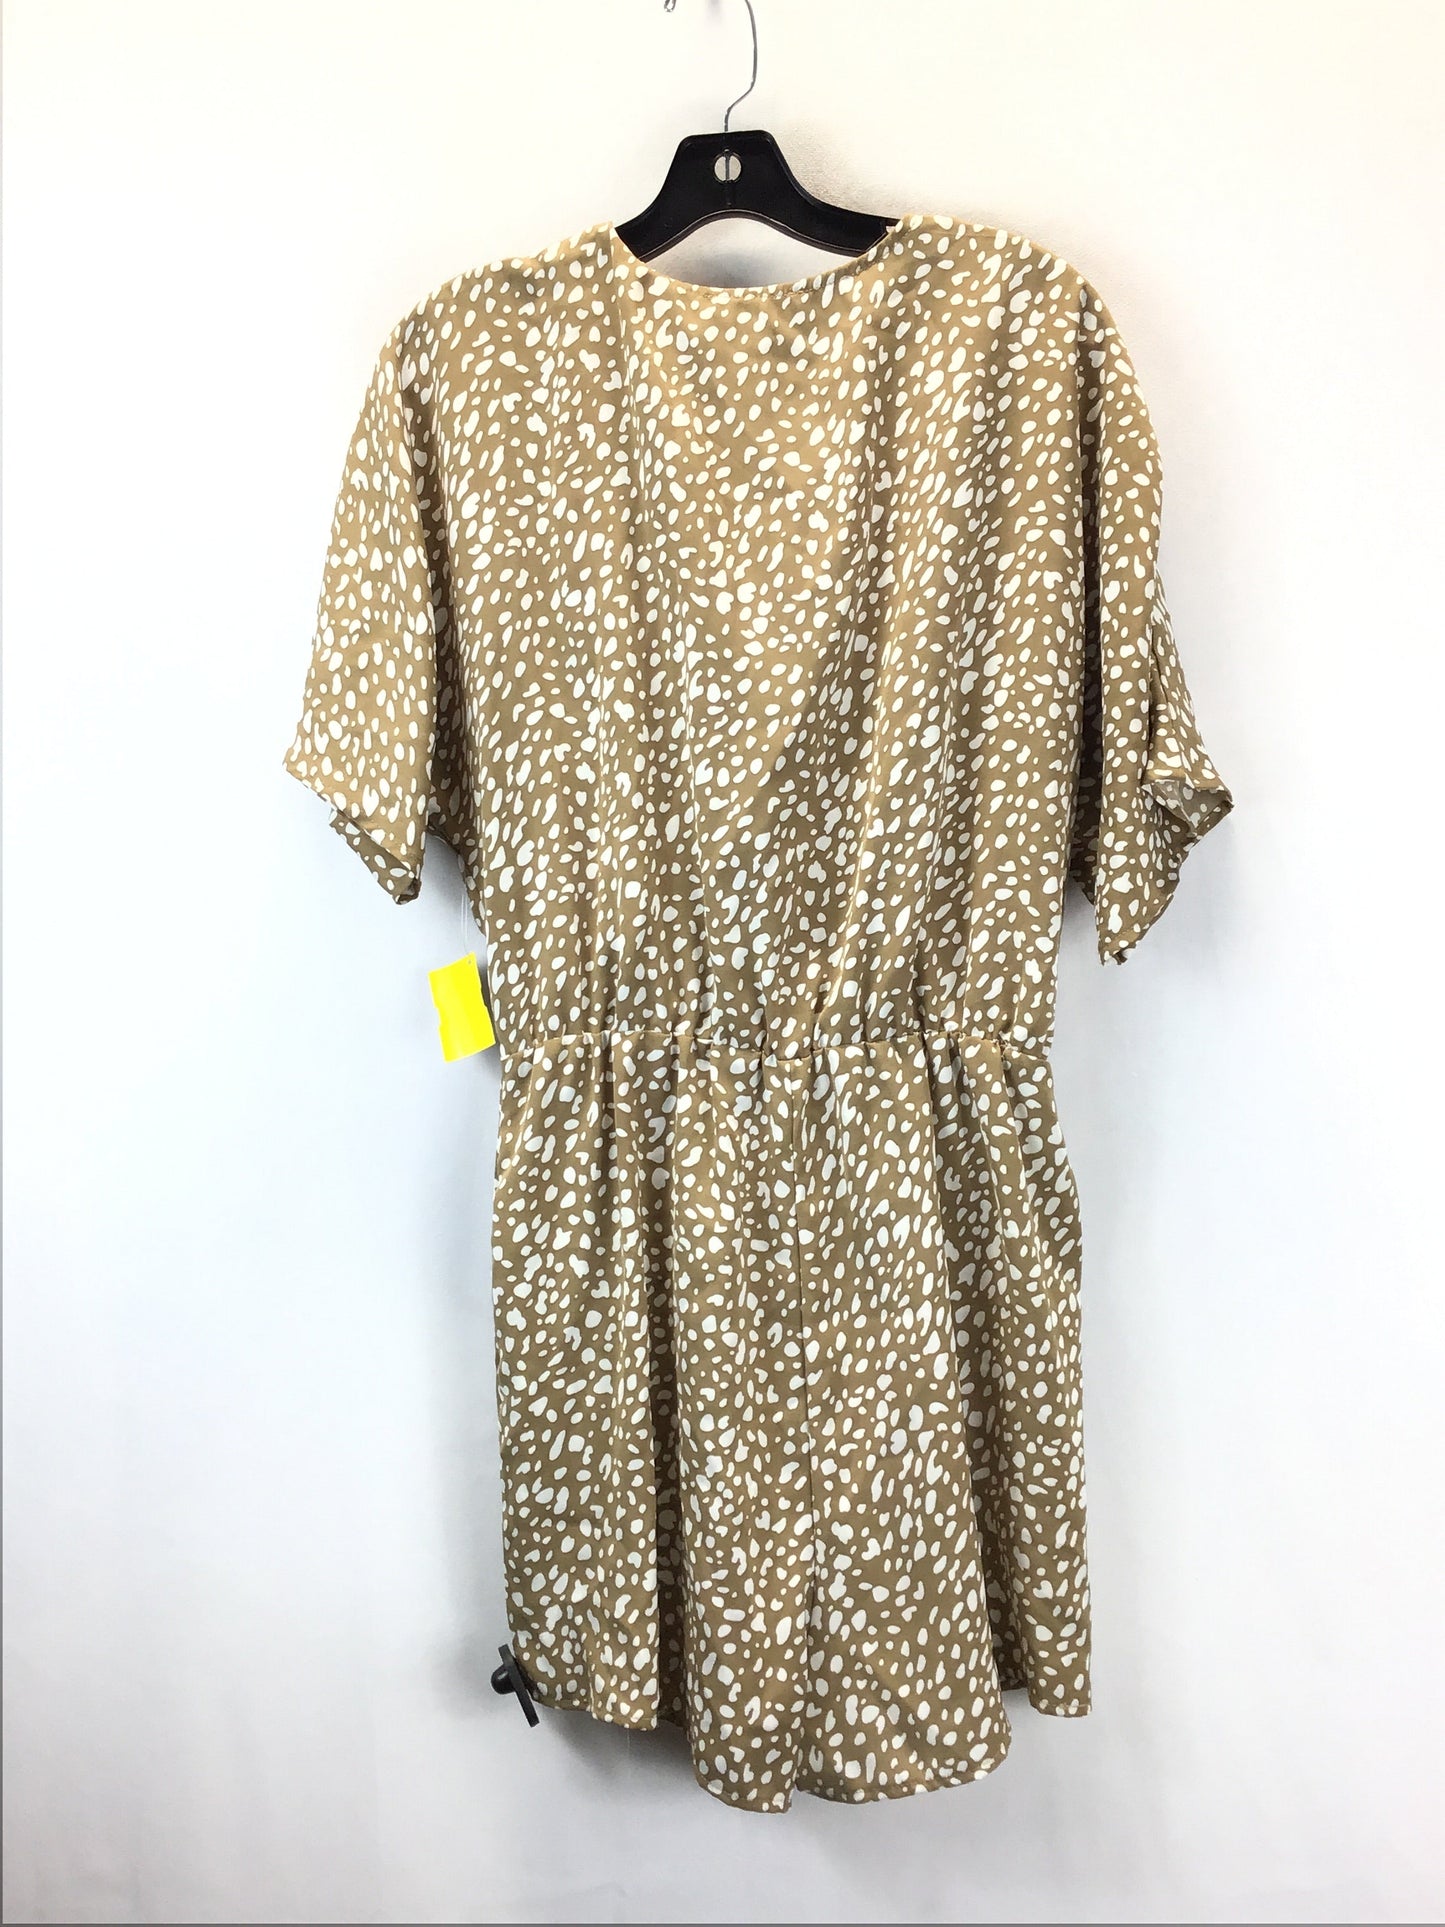 Romper By Clothes Mentor  Size: M